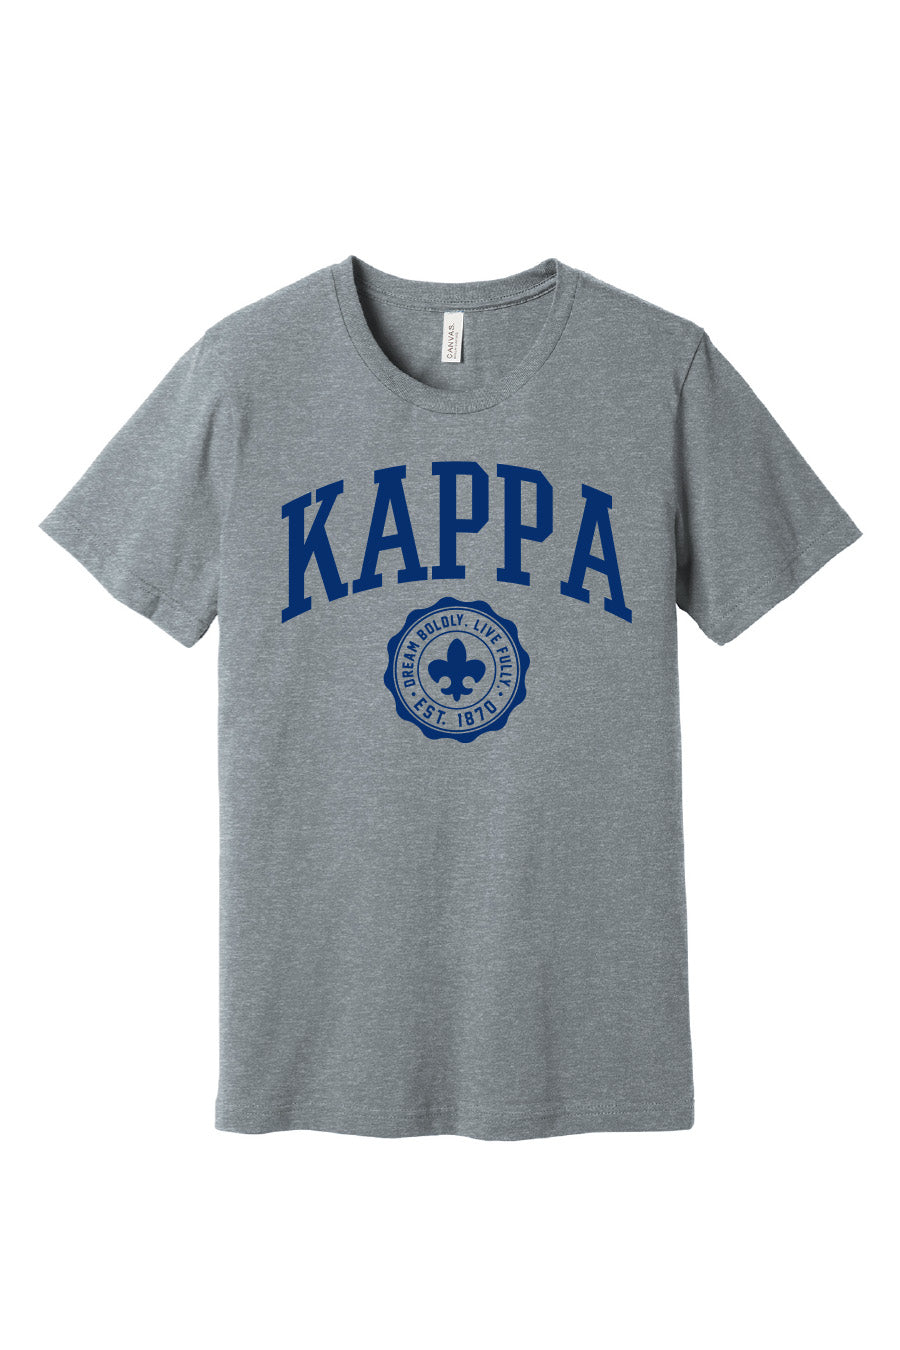 Kappa Stamp of Approval Tee